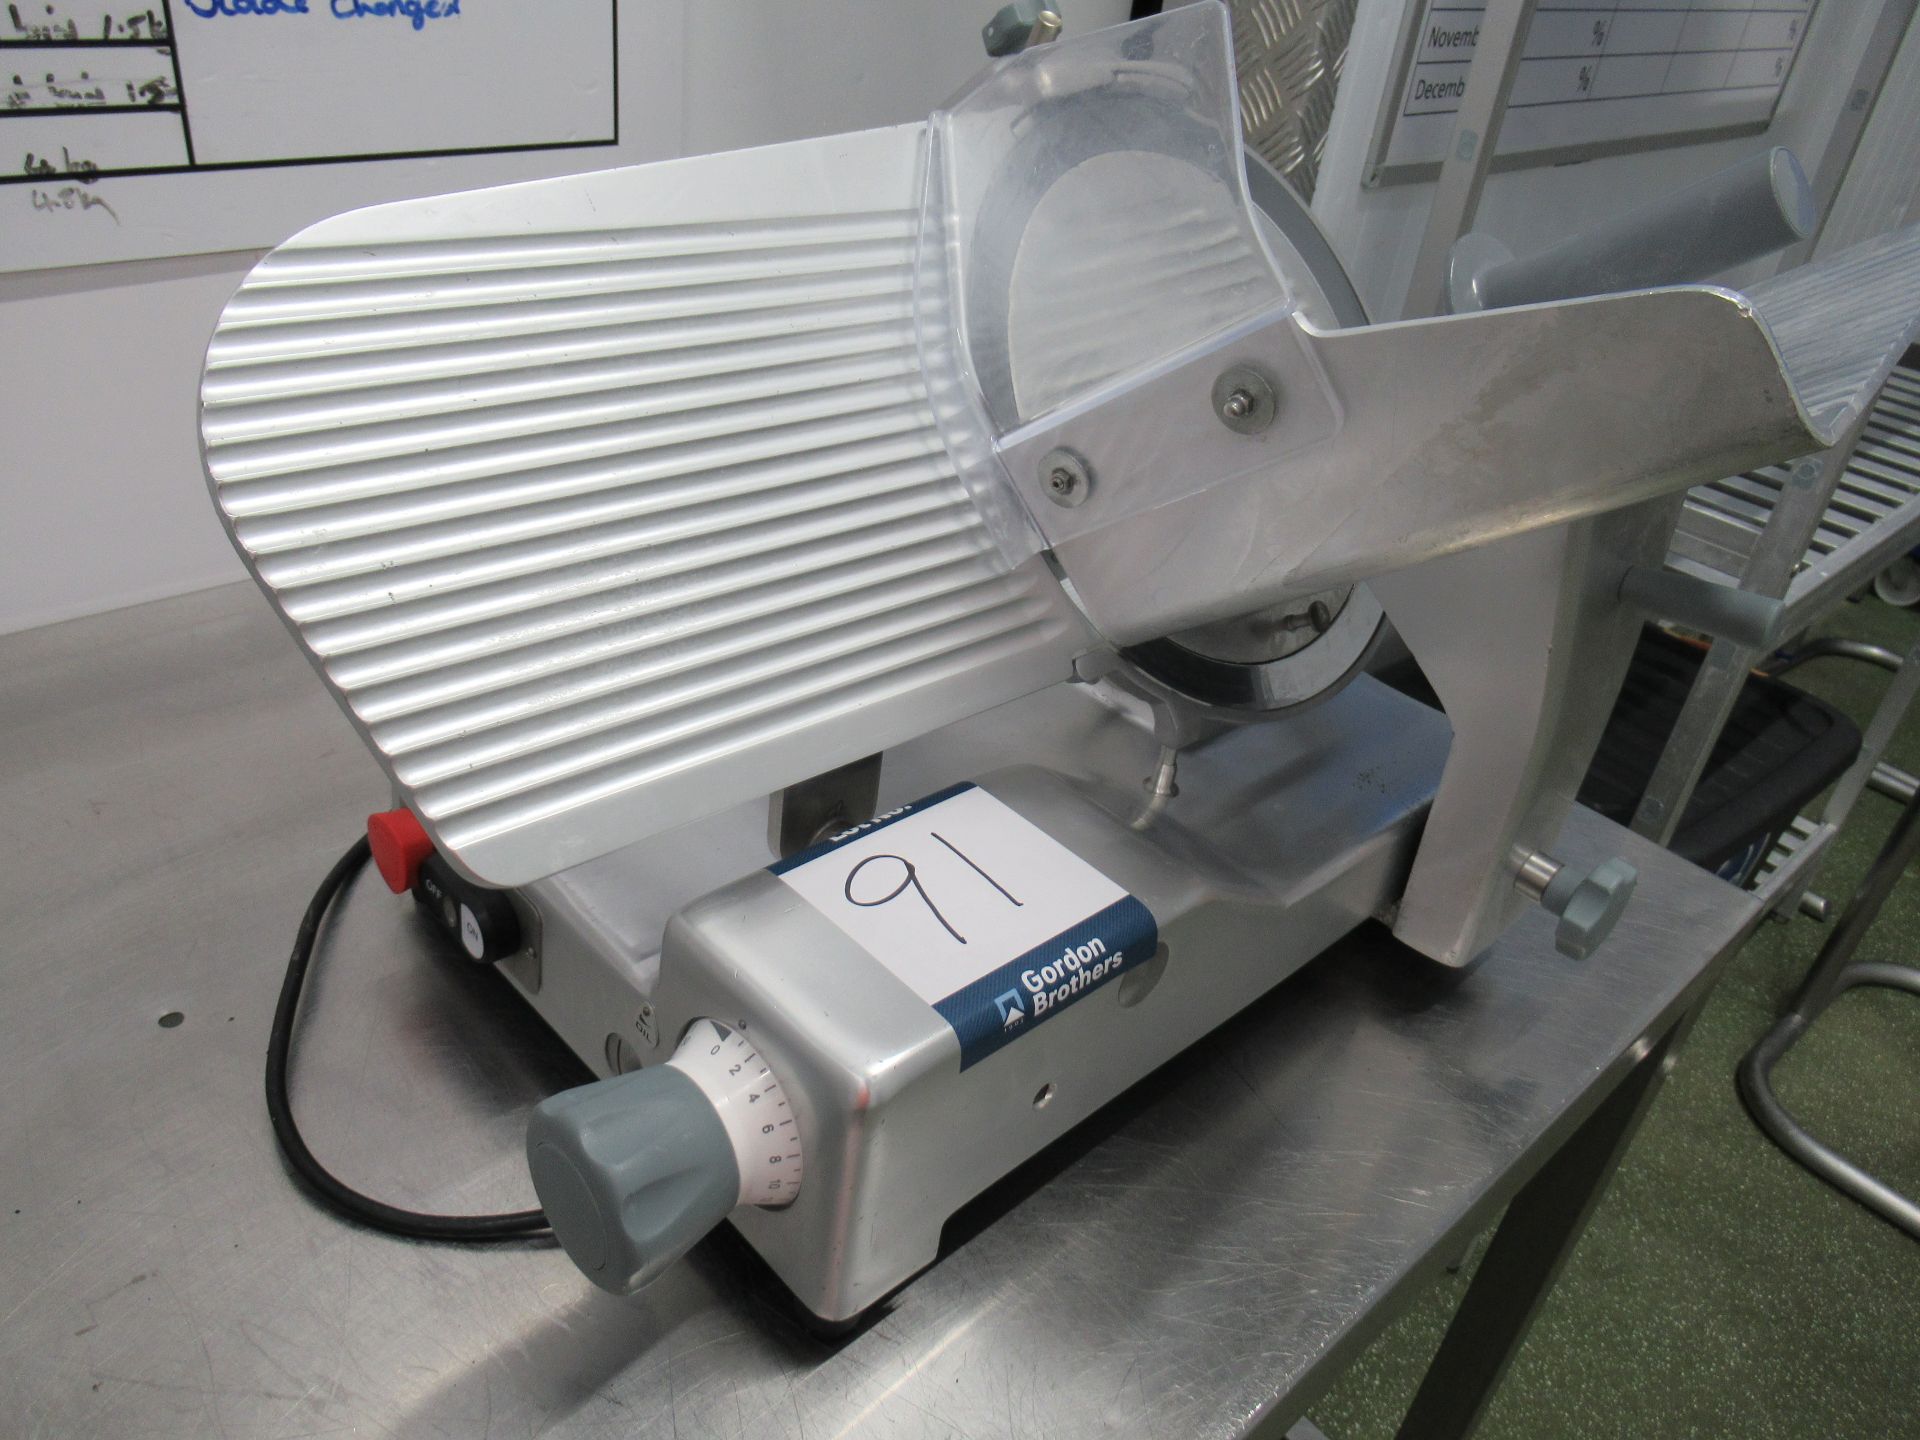 Sirman Canova 300 meat slicer, manual, bench top, Serial no: 19A00421, blade diameter 300mm - Image 3 of 6